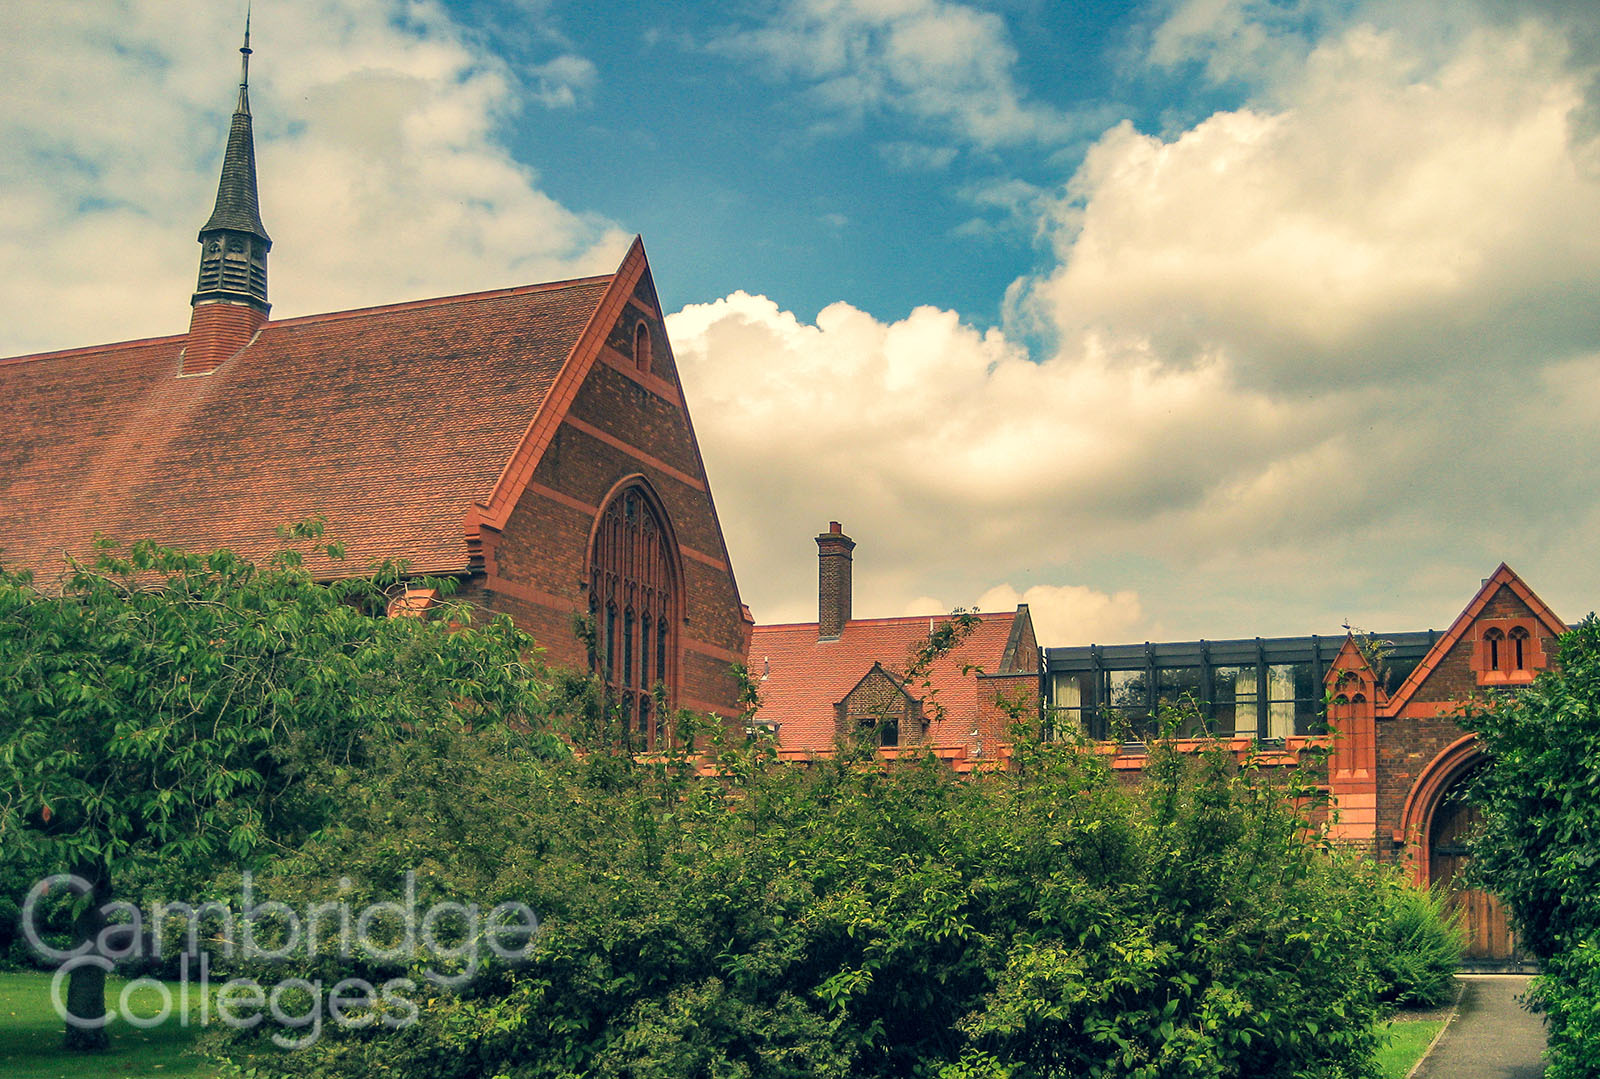 Girton College chapel, partially obscured by trees